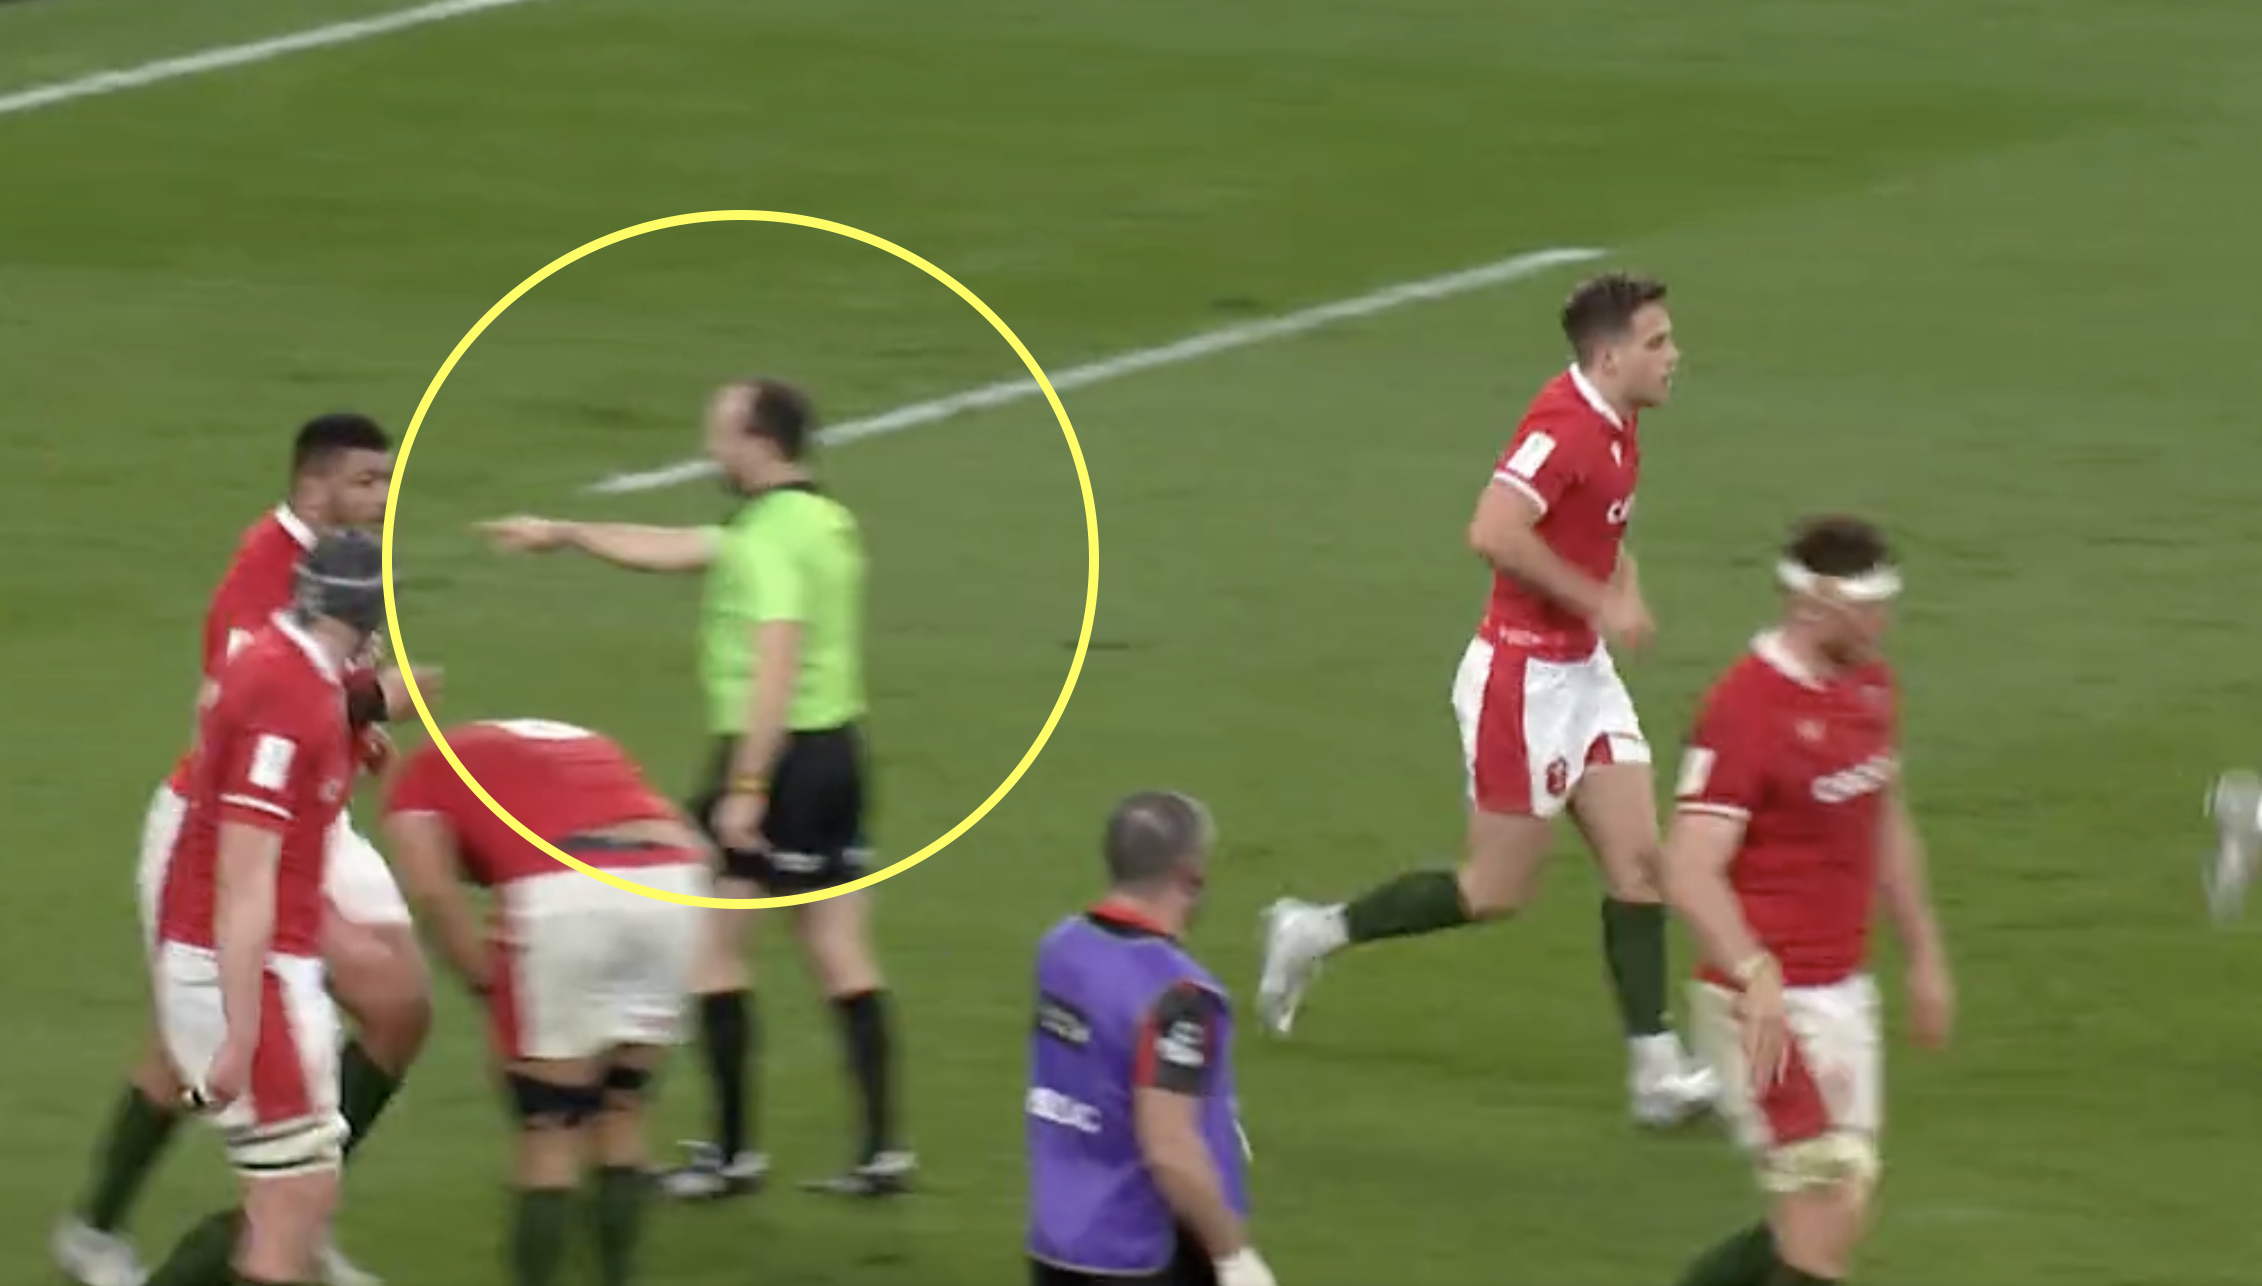 Welsh fans go into meltdown over 'ridiculous refereeing performance' to give England win